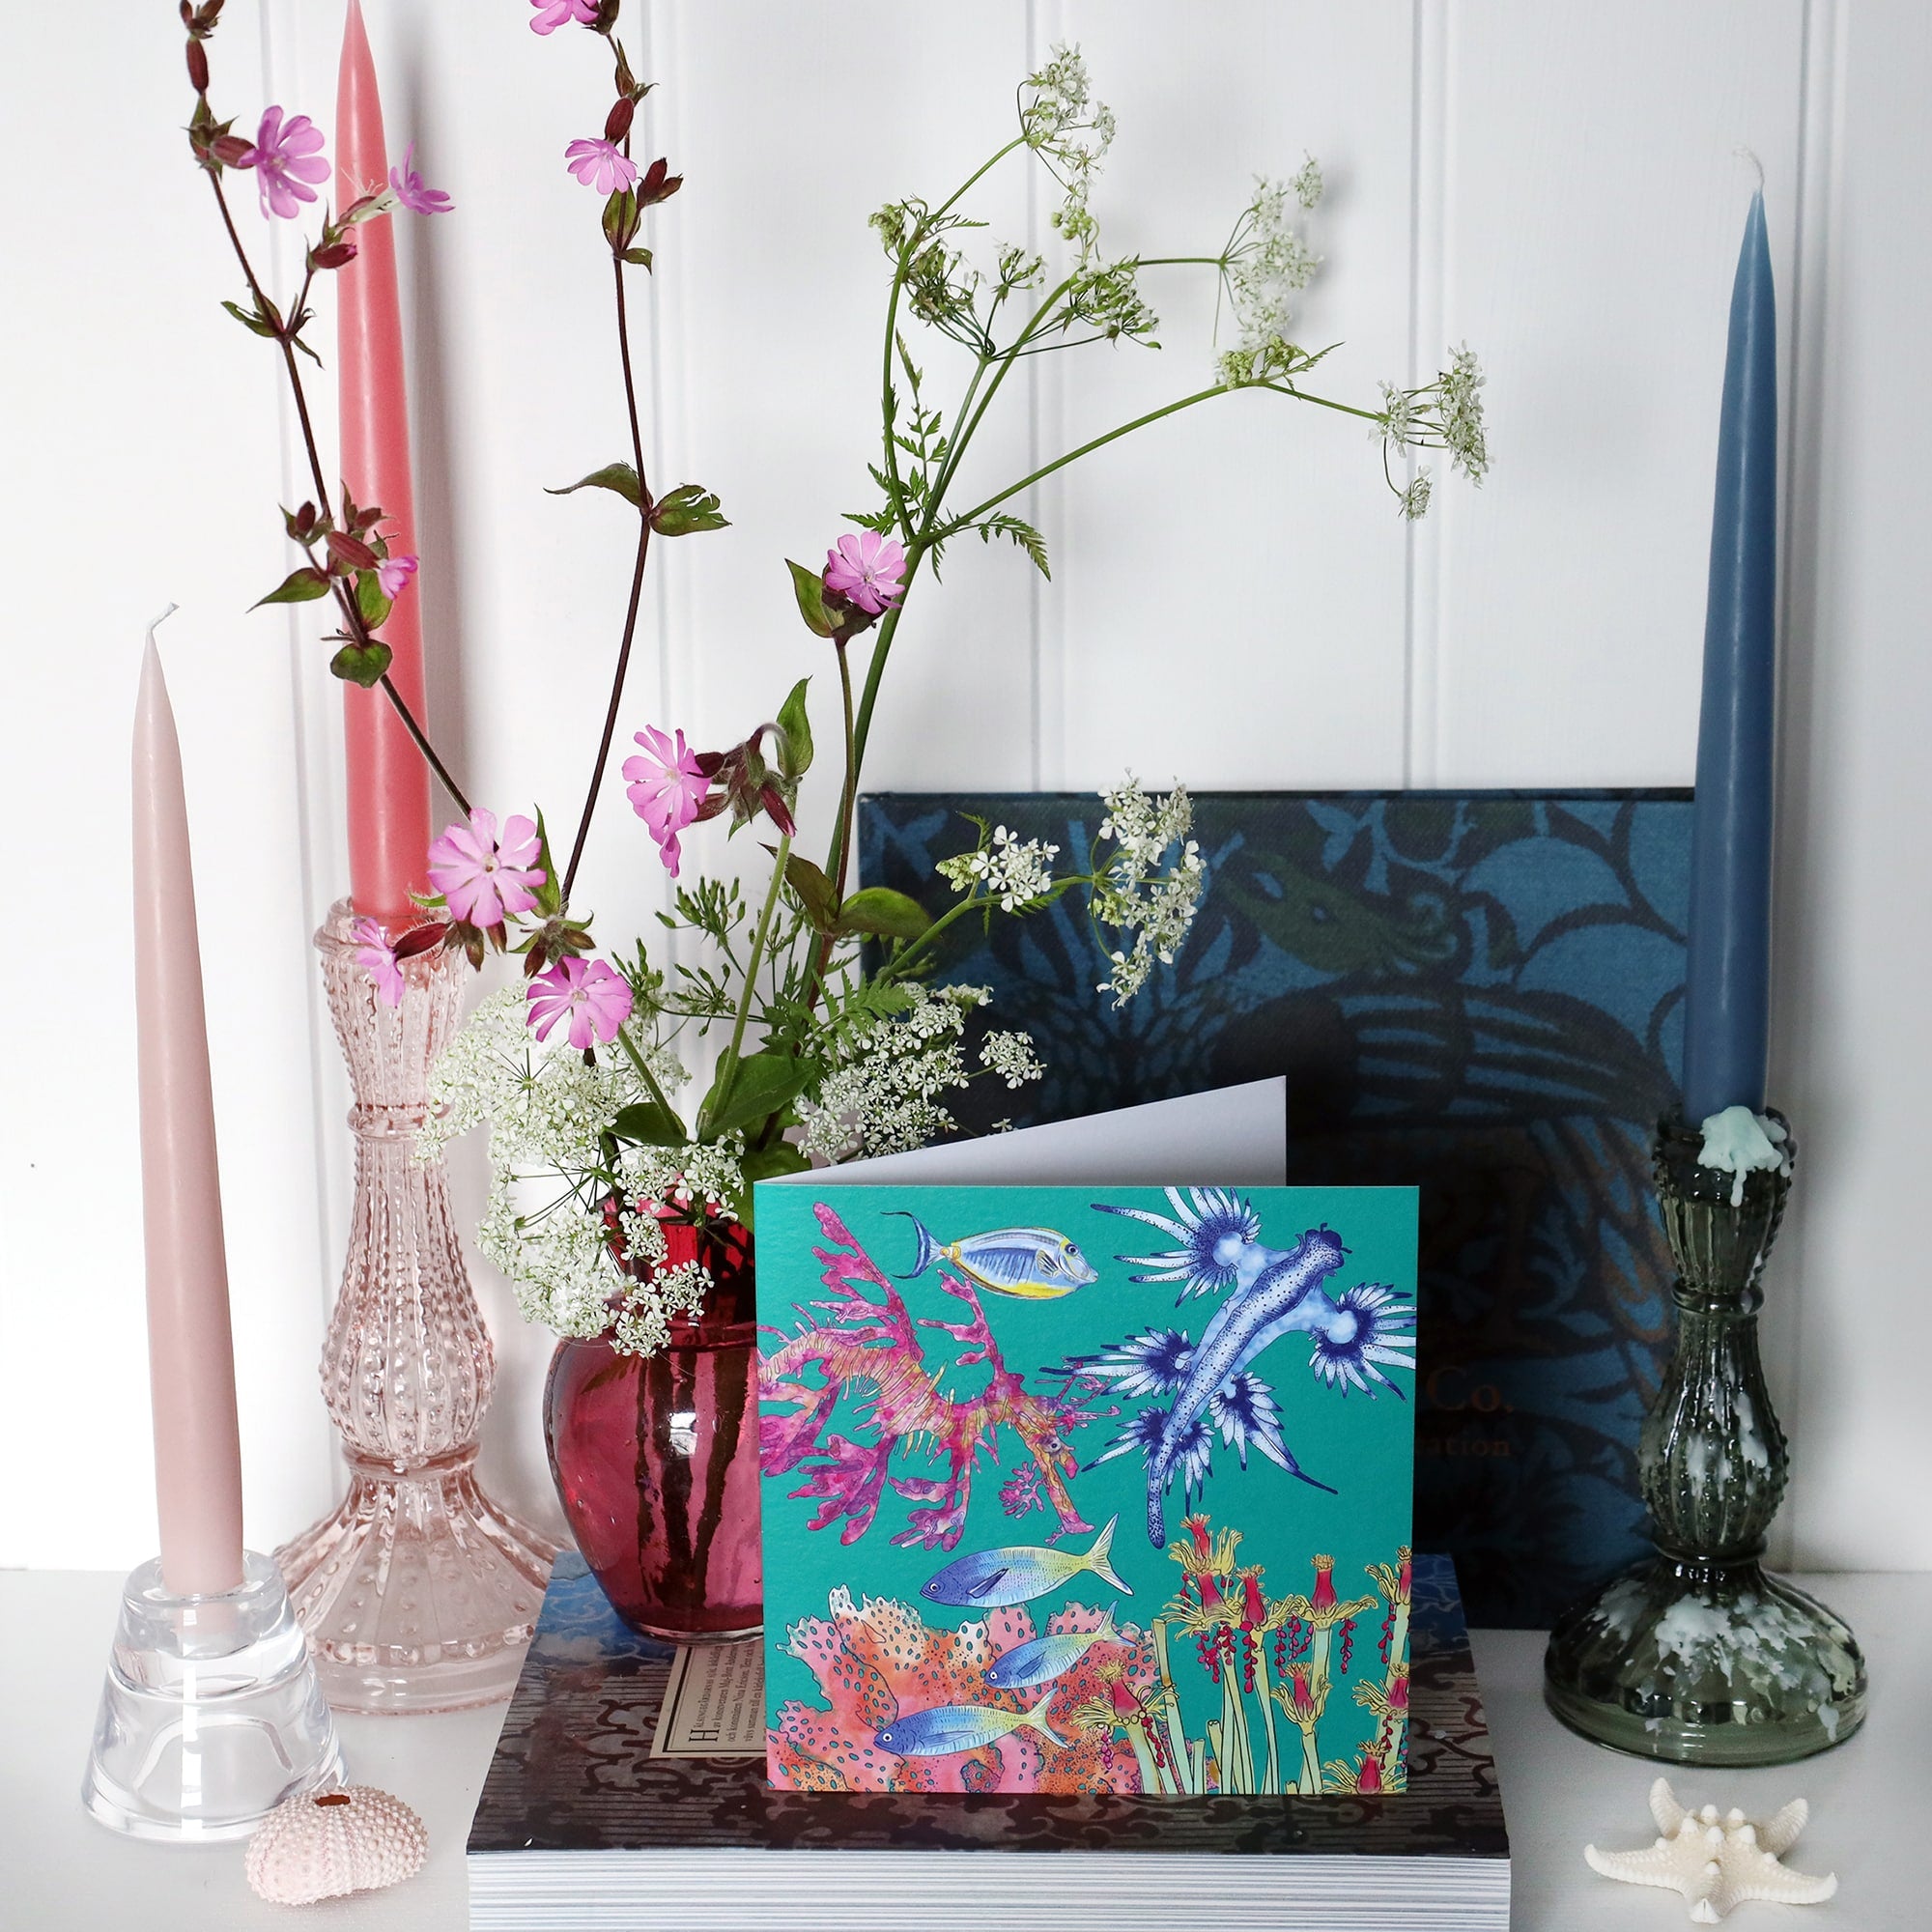 on shelf with pink and blue candles in candlesticks and a small cranberry glass jug with wild flowers in brightly coloured greeting card with illustrations of nudibranch, sea slug tropical fish and coral on a jade coloured background